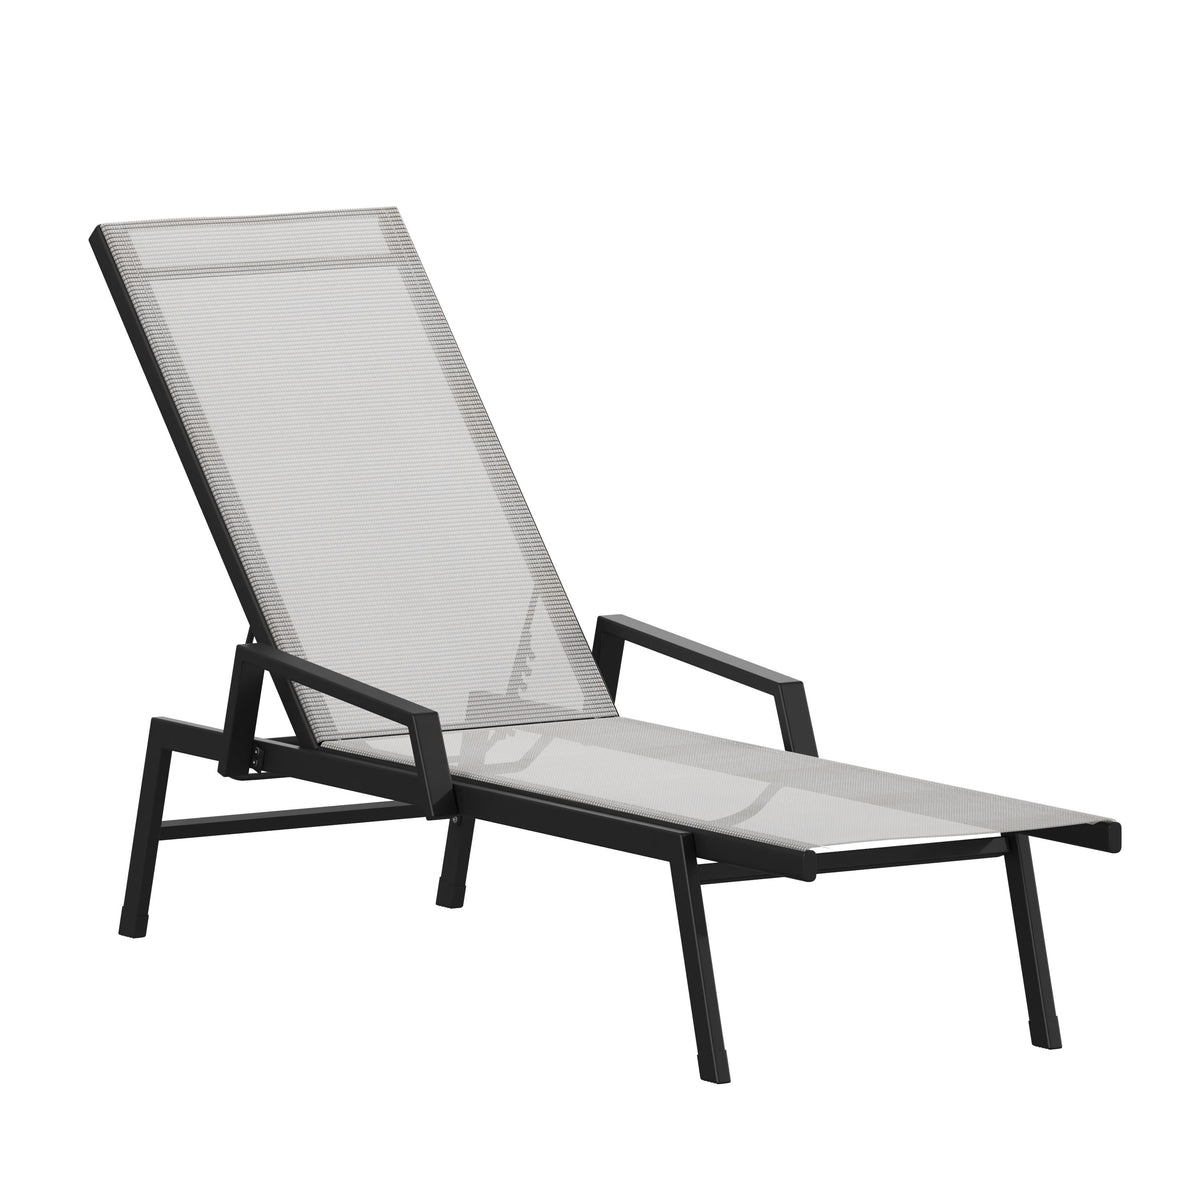 Gray |#| All-Weather Textilene Adjustable Chaise Lounge Chair with Arms - Black/Gray